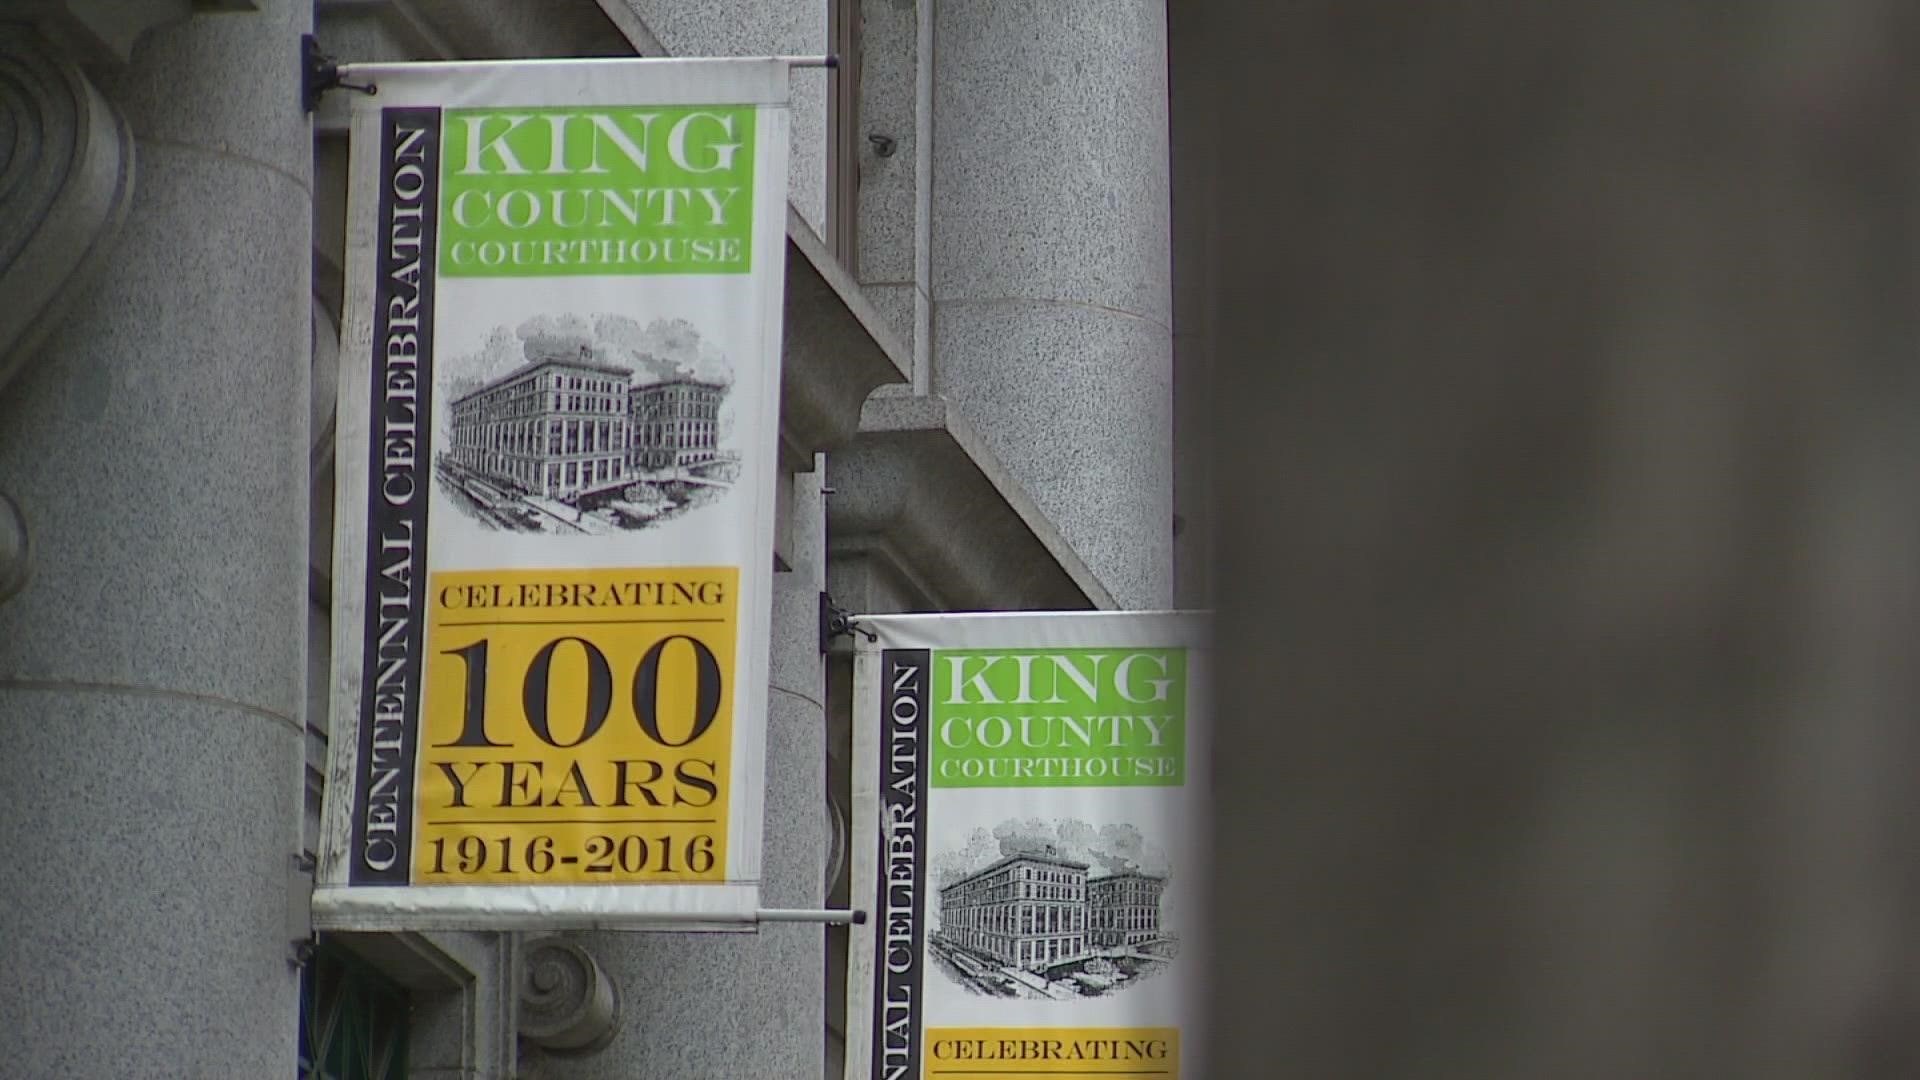 There’s already support for the new positions, but the King County Council needs to approve it. The council is expected to vote in late June or early July.